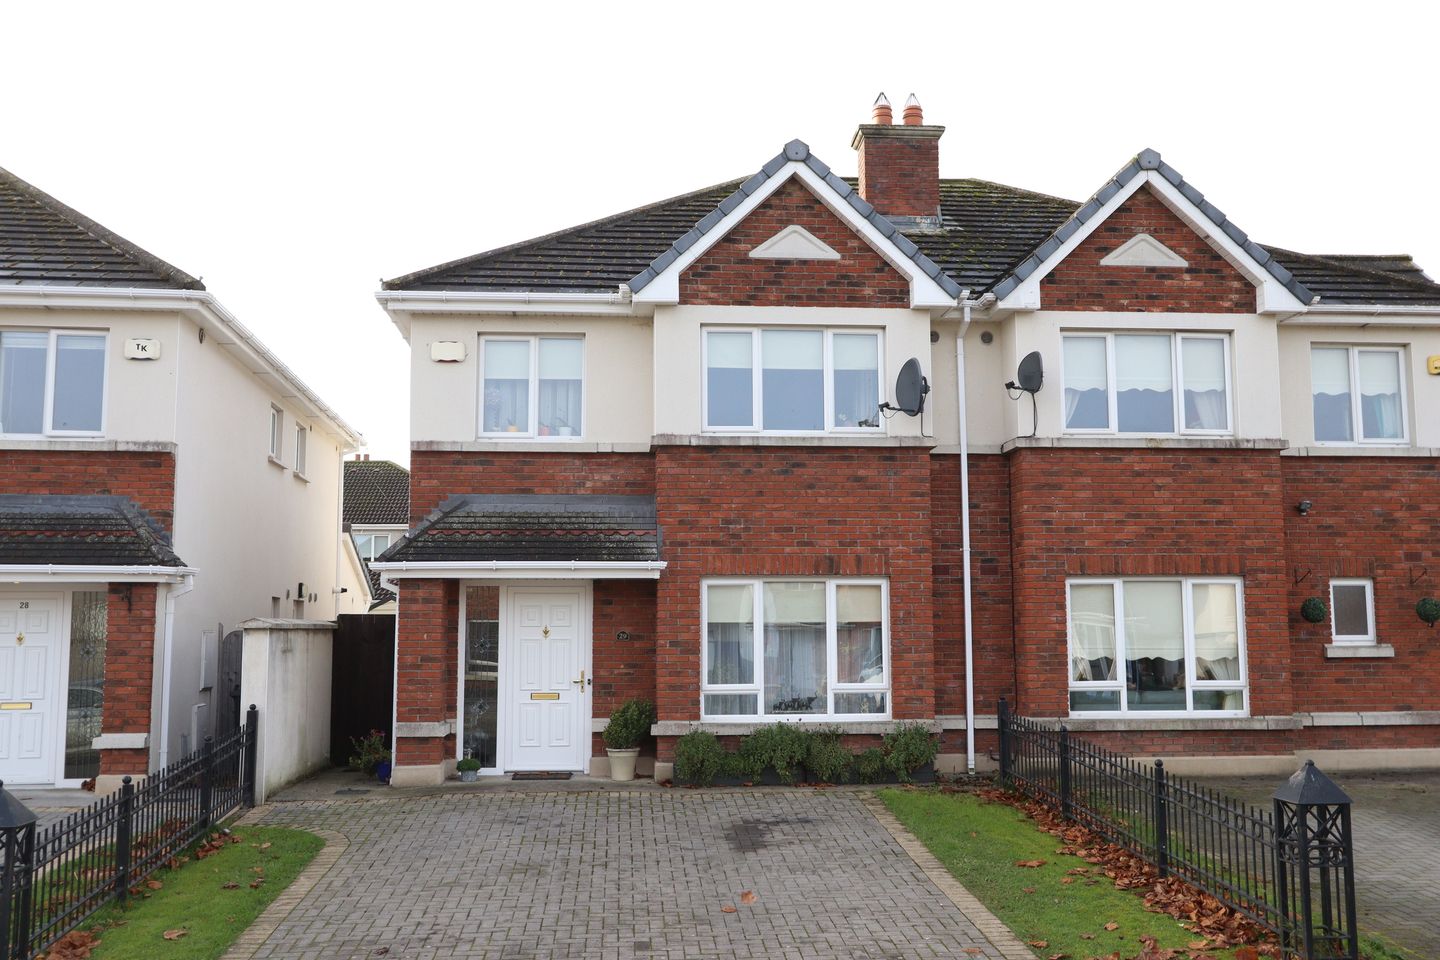 29 Newcastle Woods Drive, Enfield, Co. Meath, A83KP71